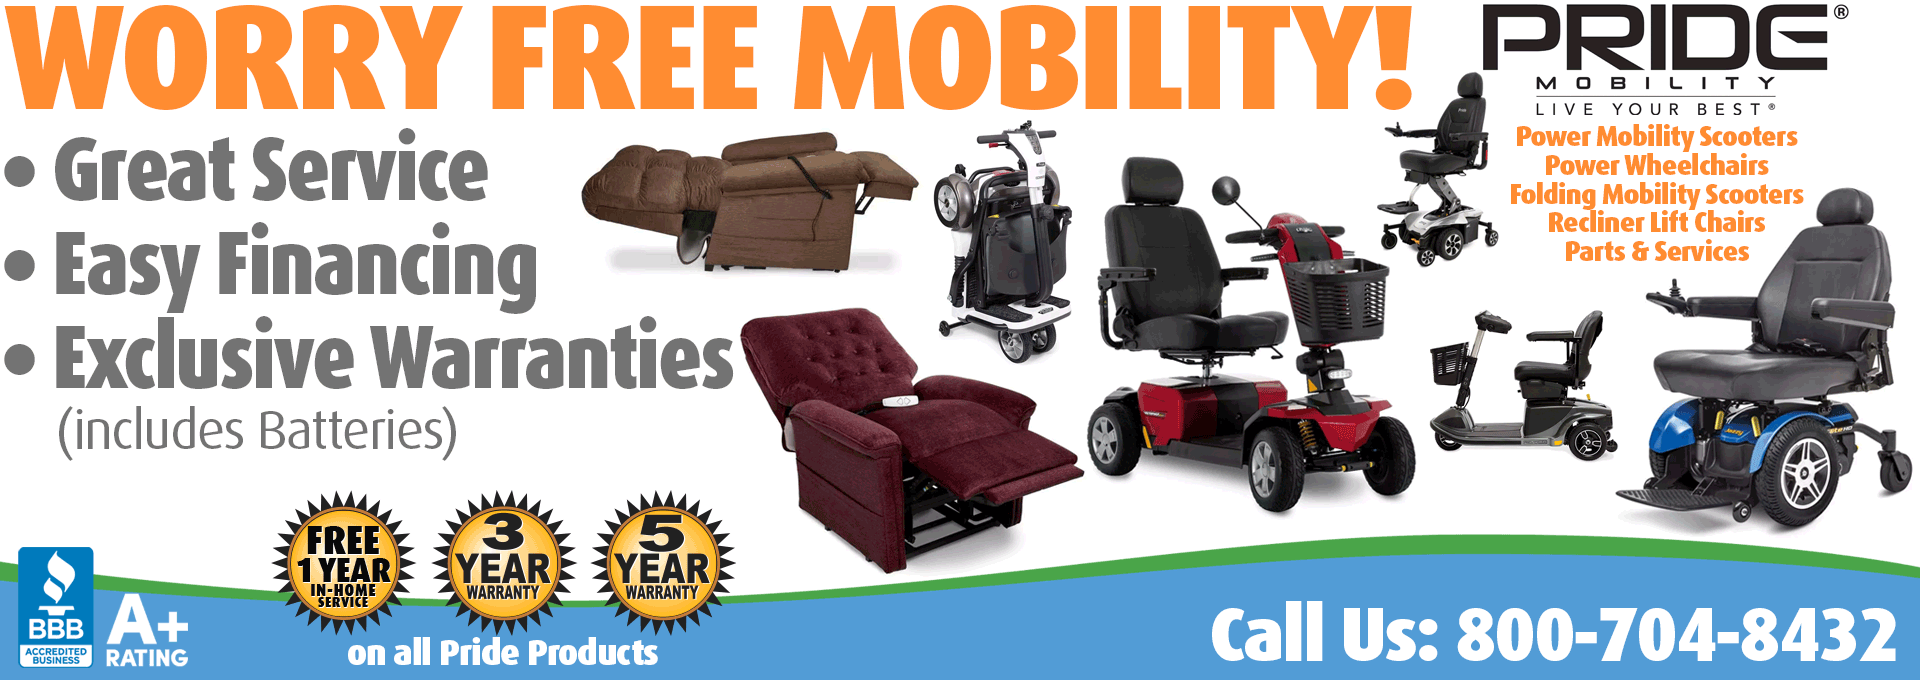 Living Well Stores: The Best Mobility products from Pride Mobility, featuring Power Mobility Scooters, Power Wheelchairs, Folding Mobility Scooters, Power Recliner Lift Chairs and Parts and Services